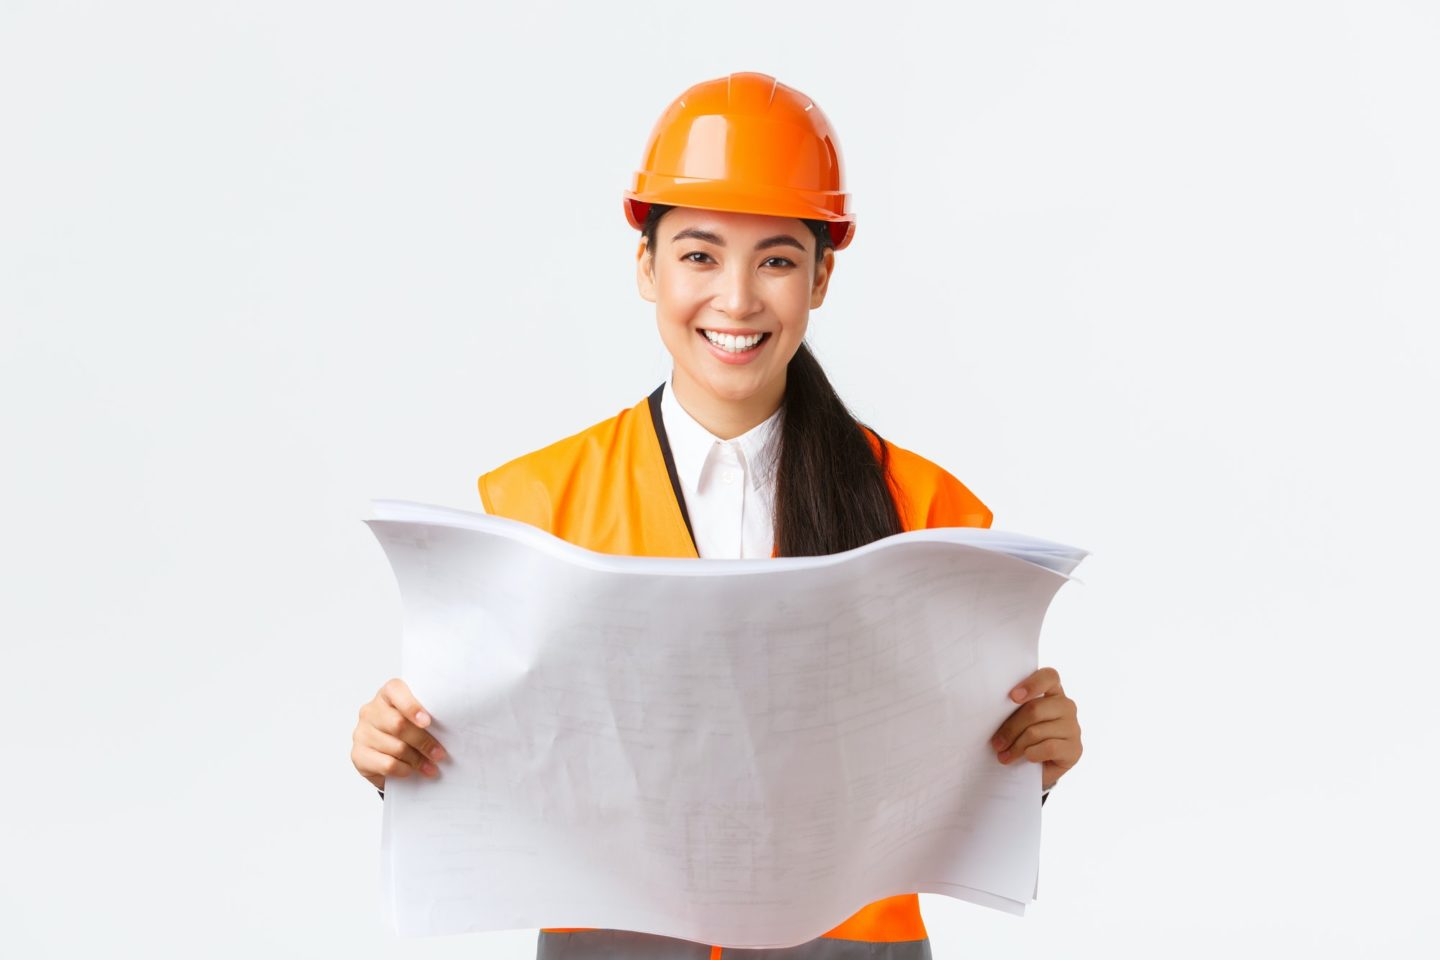 Smiling Pretty Asian Female Architect Industrial Woman In Safety Helmet And Reflective Jacket E1600416965396.jpg